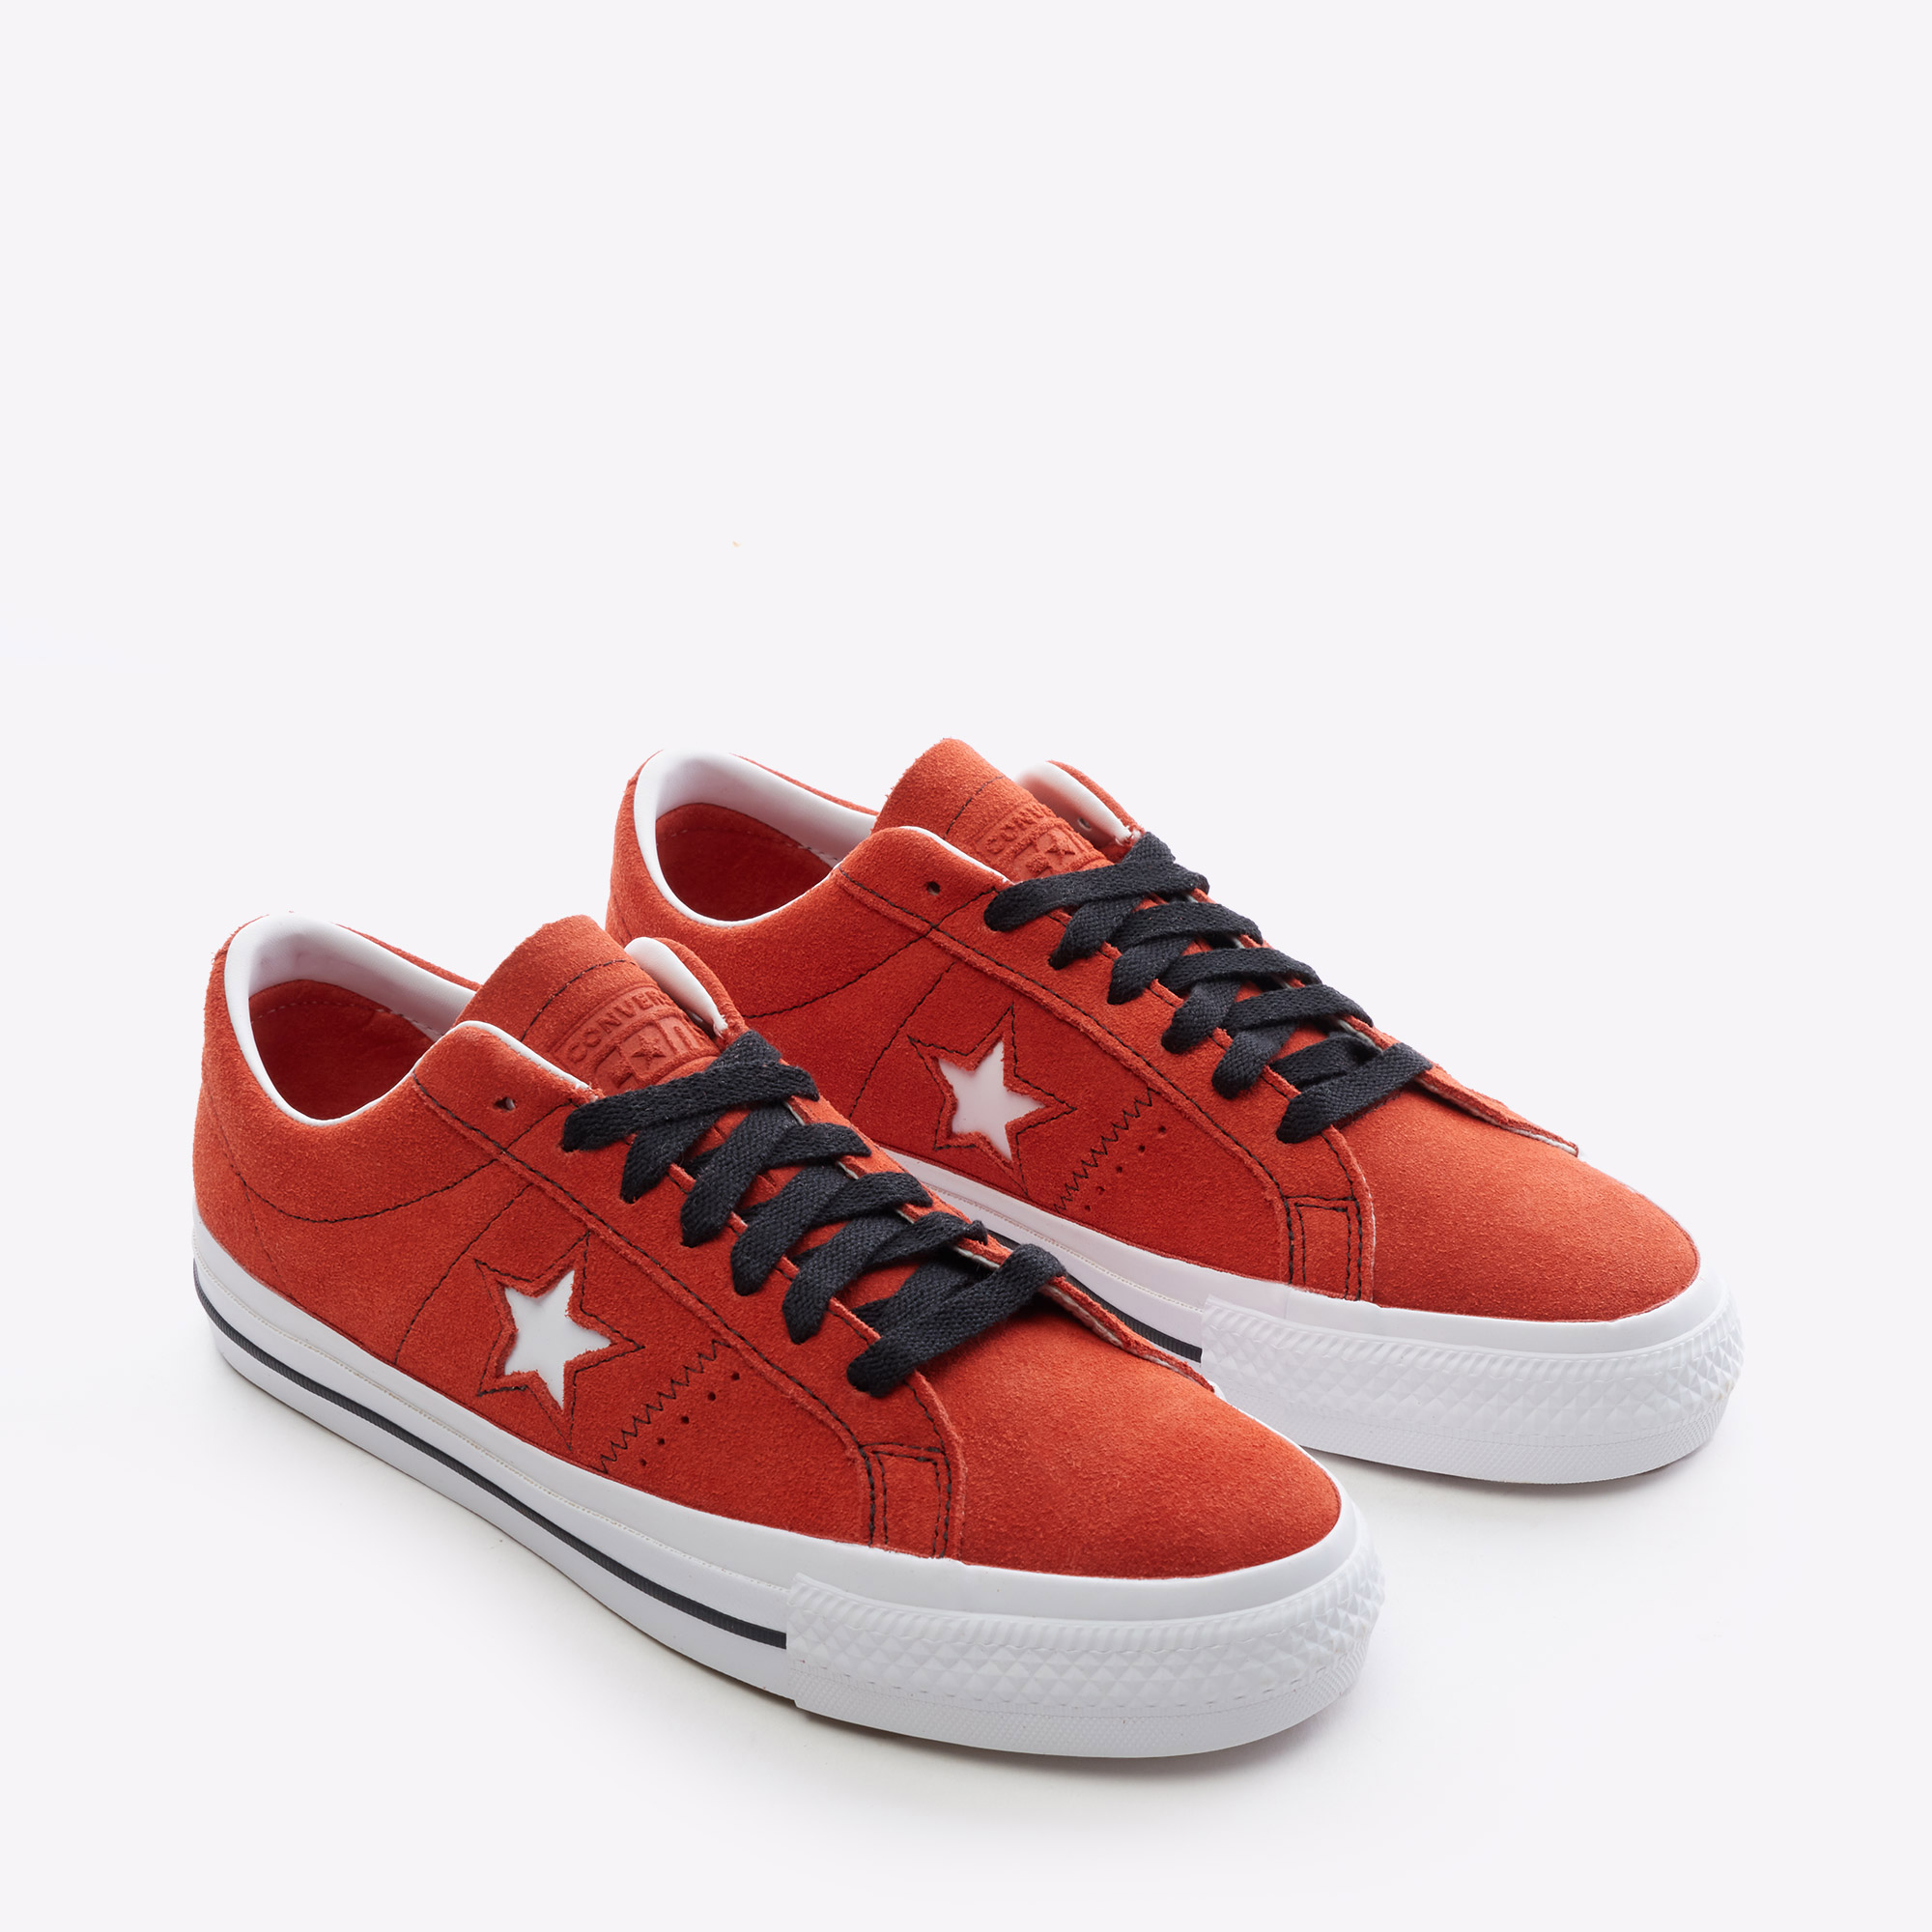  Cons One Star Pro Suede